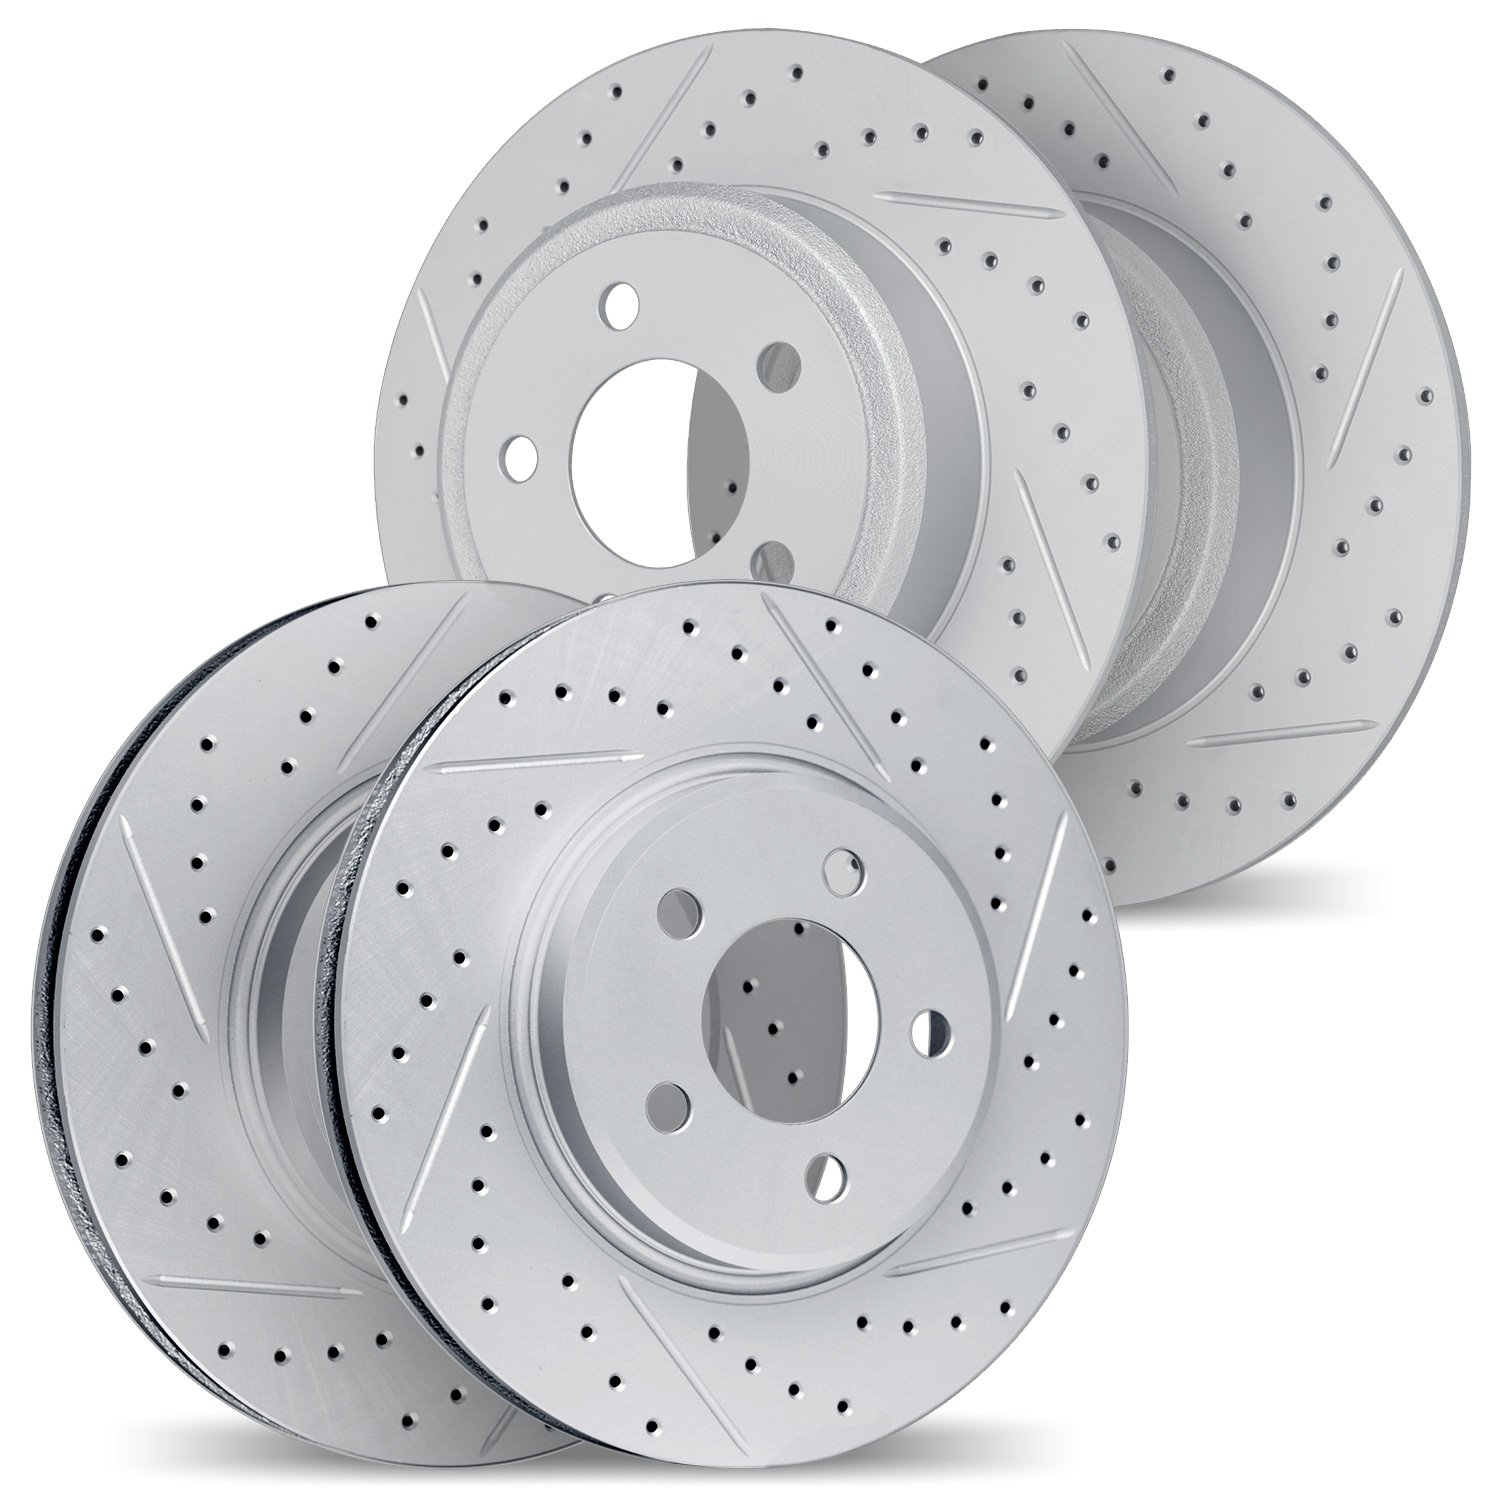 2004-67028 Geoperformance Drilled/Slotted Brake Rotors, 2007-2013 Infiniti/Nissan, Position: Front and Rear